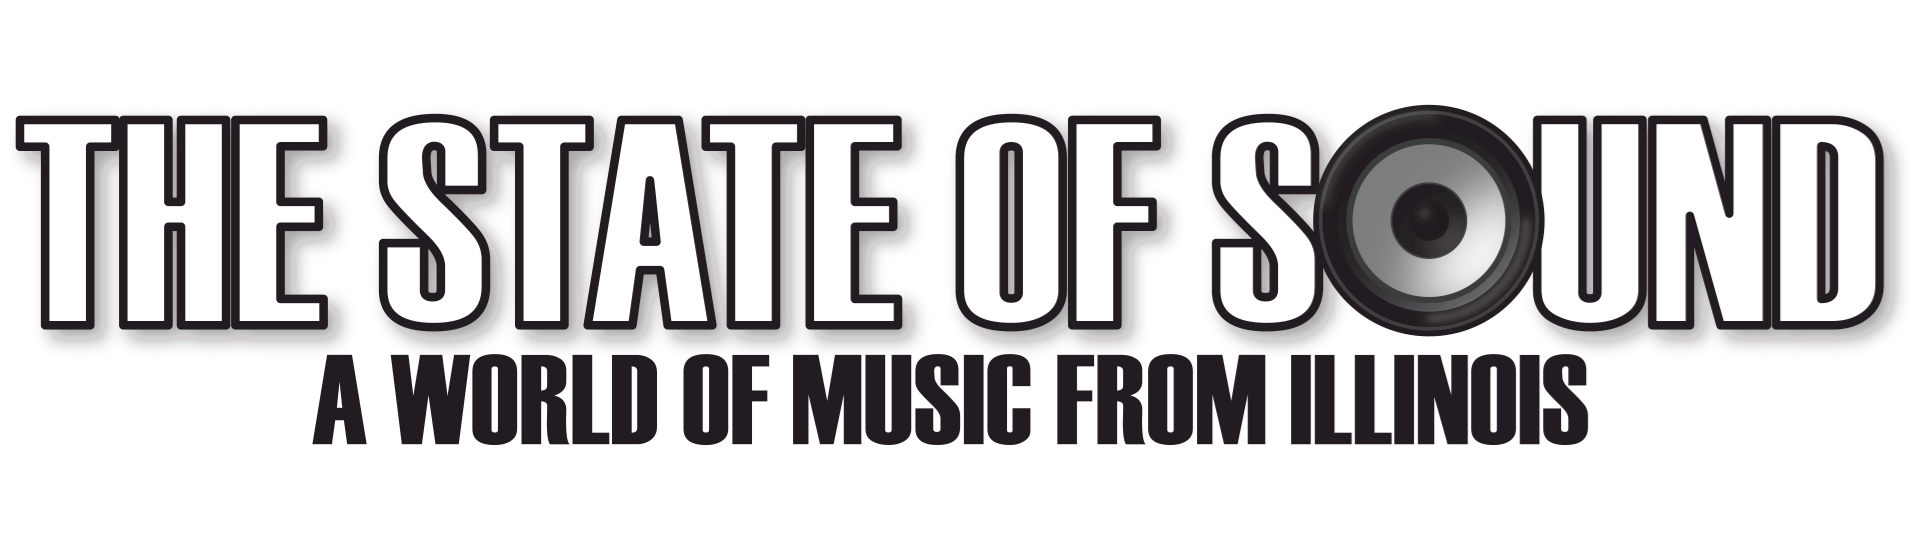 The State of Sound: A World of Music from Illinois.